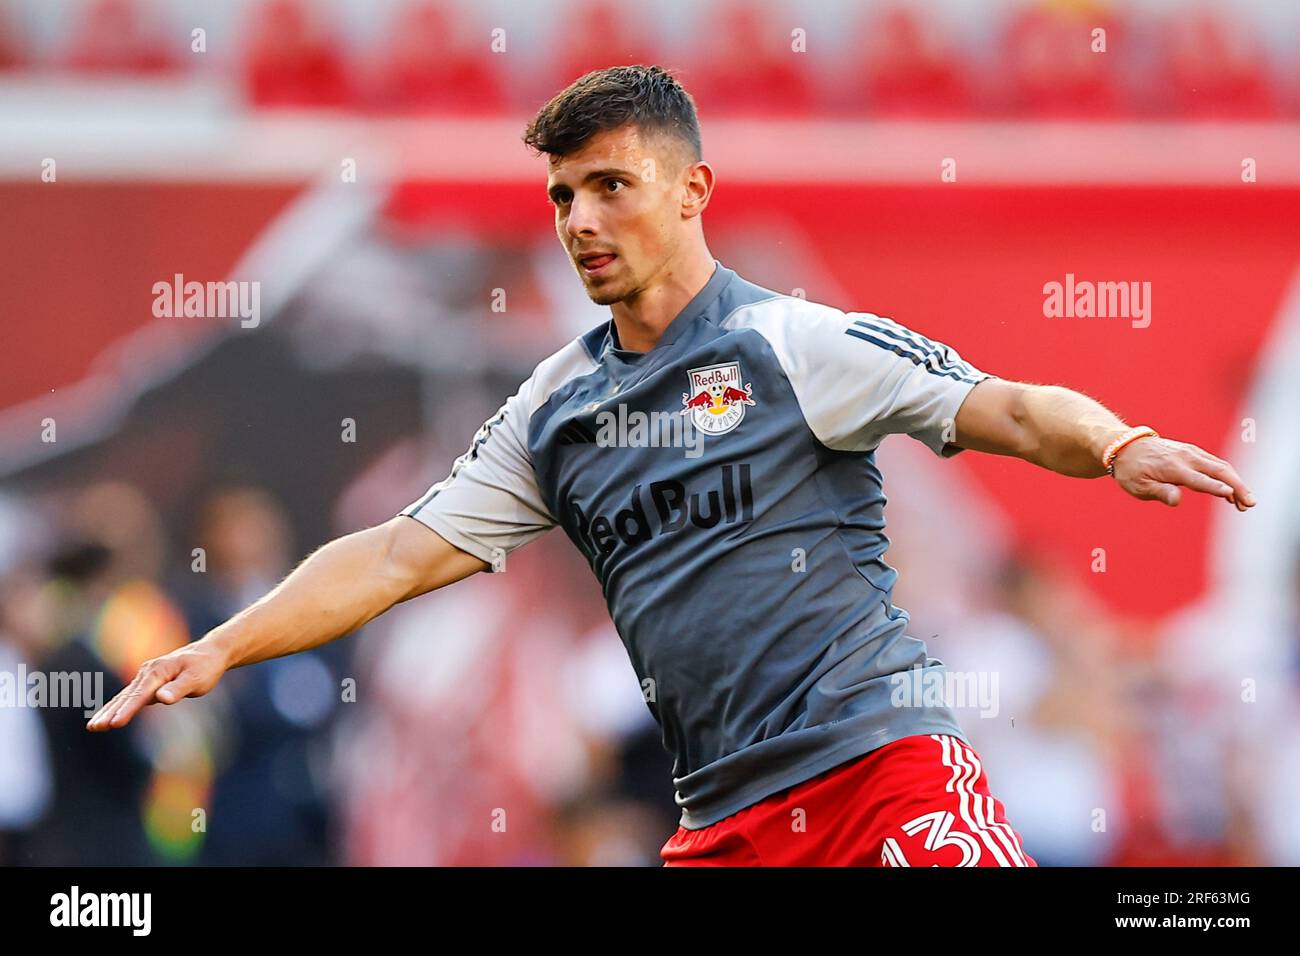 HARRISON, NJ - JULY 30: Dante Vanzeir #13 of New York Red Bulls warms up  prior to the Leagues Cup match between the New York Red Bulls and Atlético  San Luis at